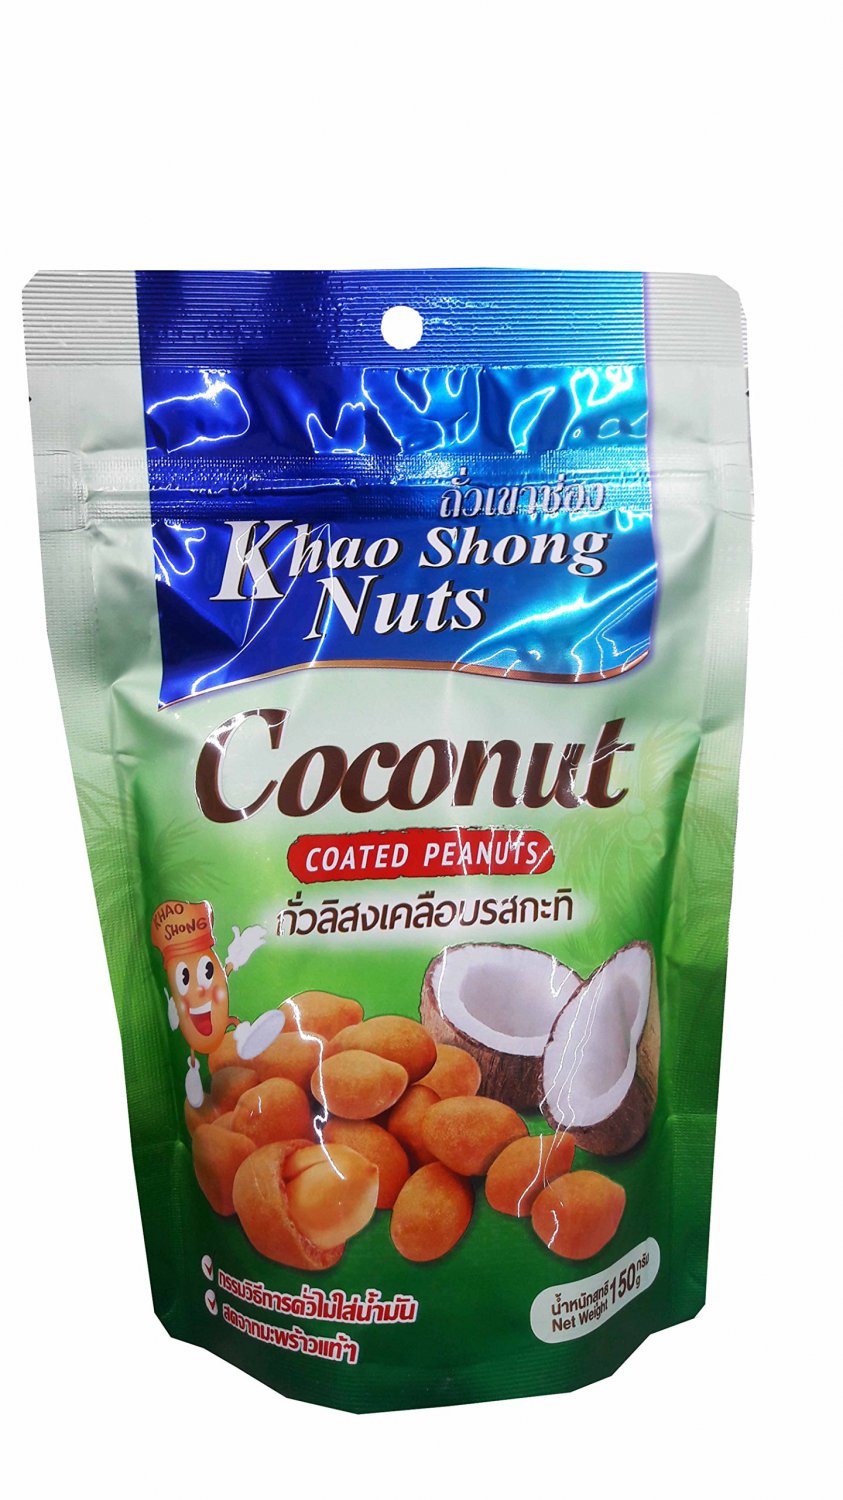 2 packs of Khao Shong Nuts Coconut Coated Peanuts. Healthy and Del